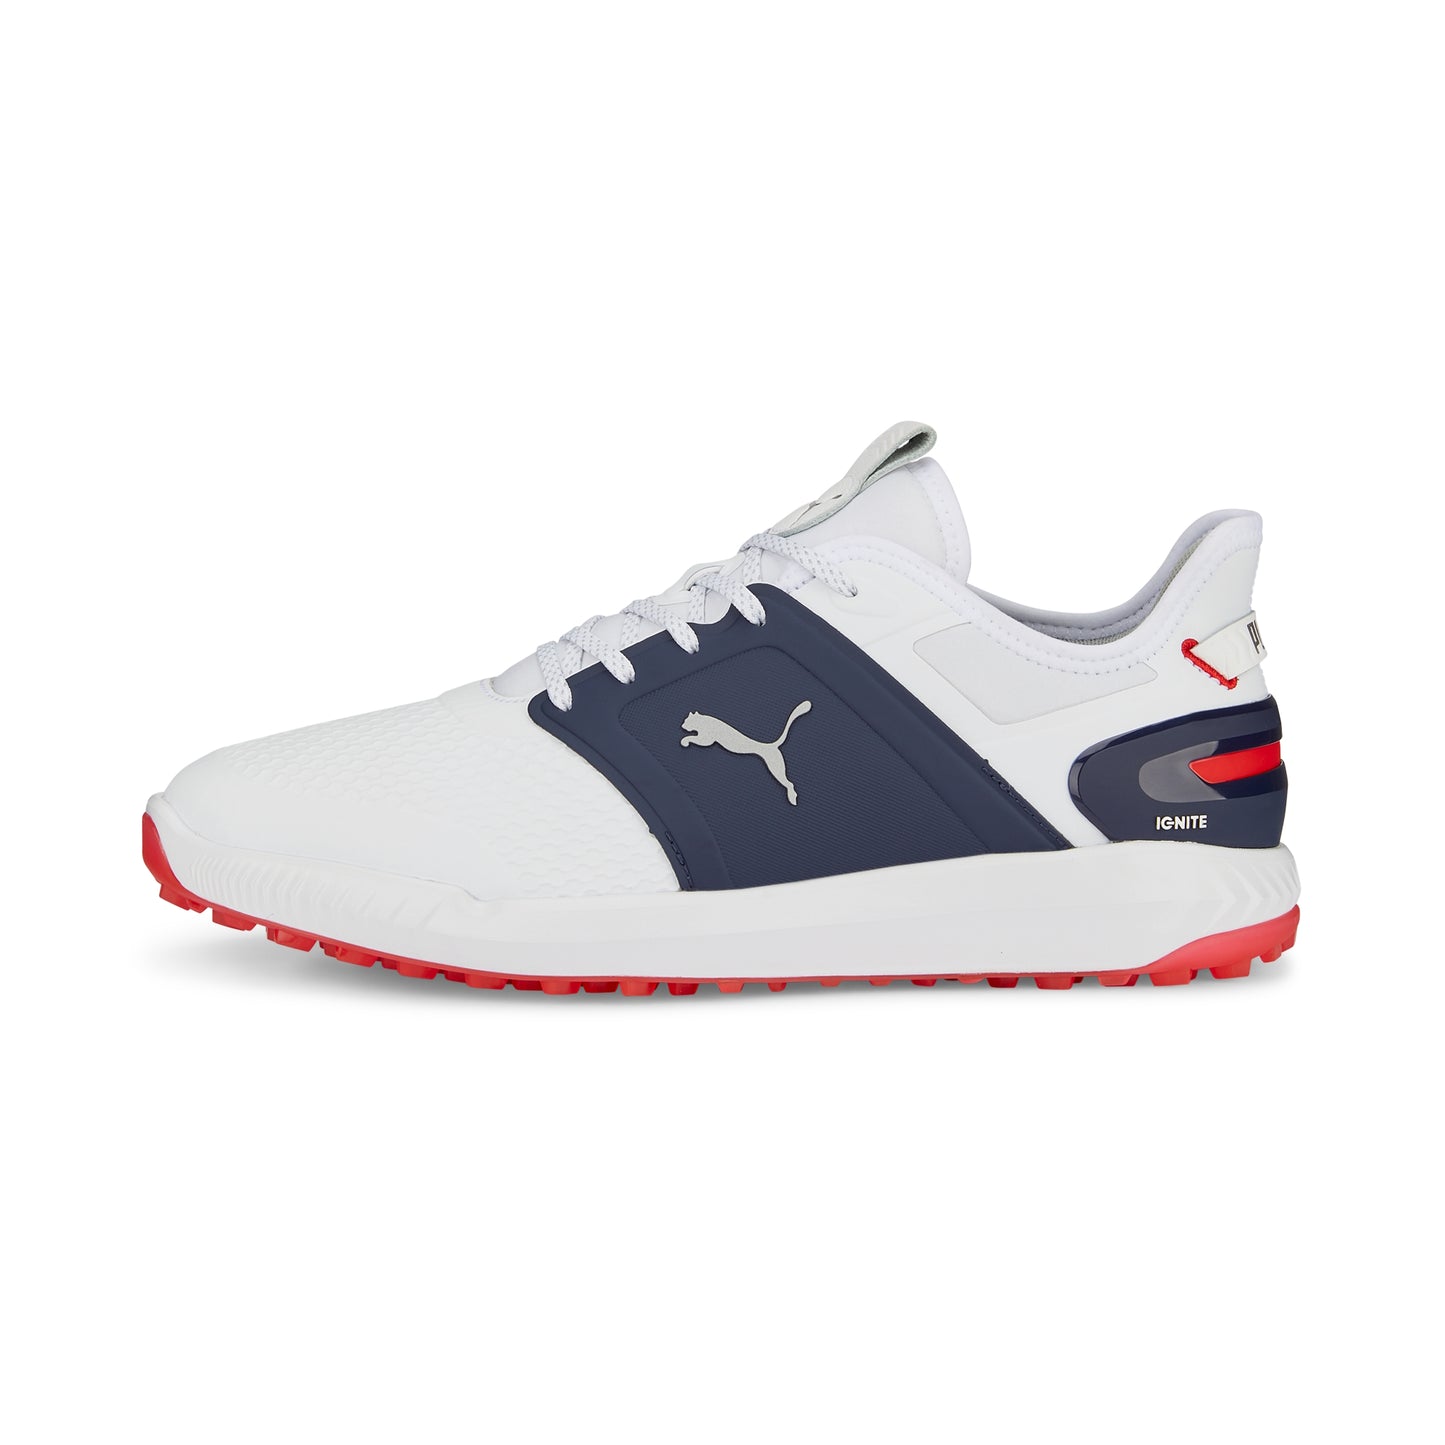 Puma Men's Ignite Elevate Spikeless Golf Shoes - White/Navy